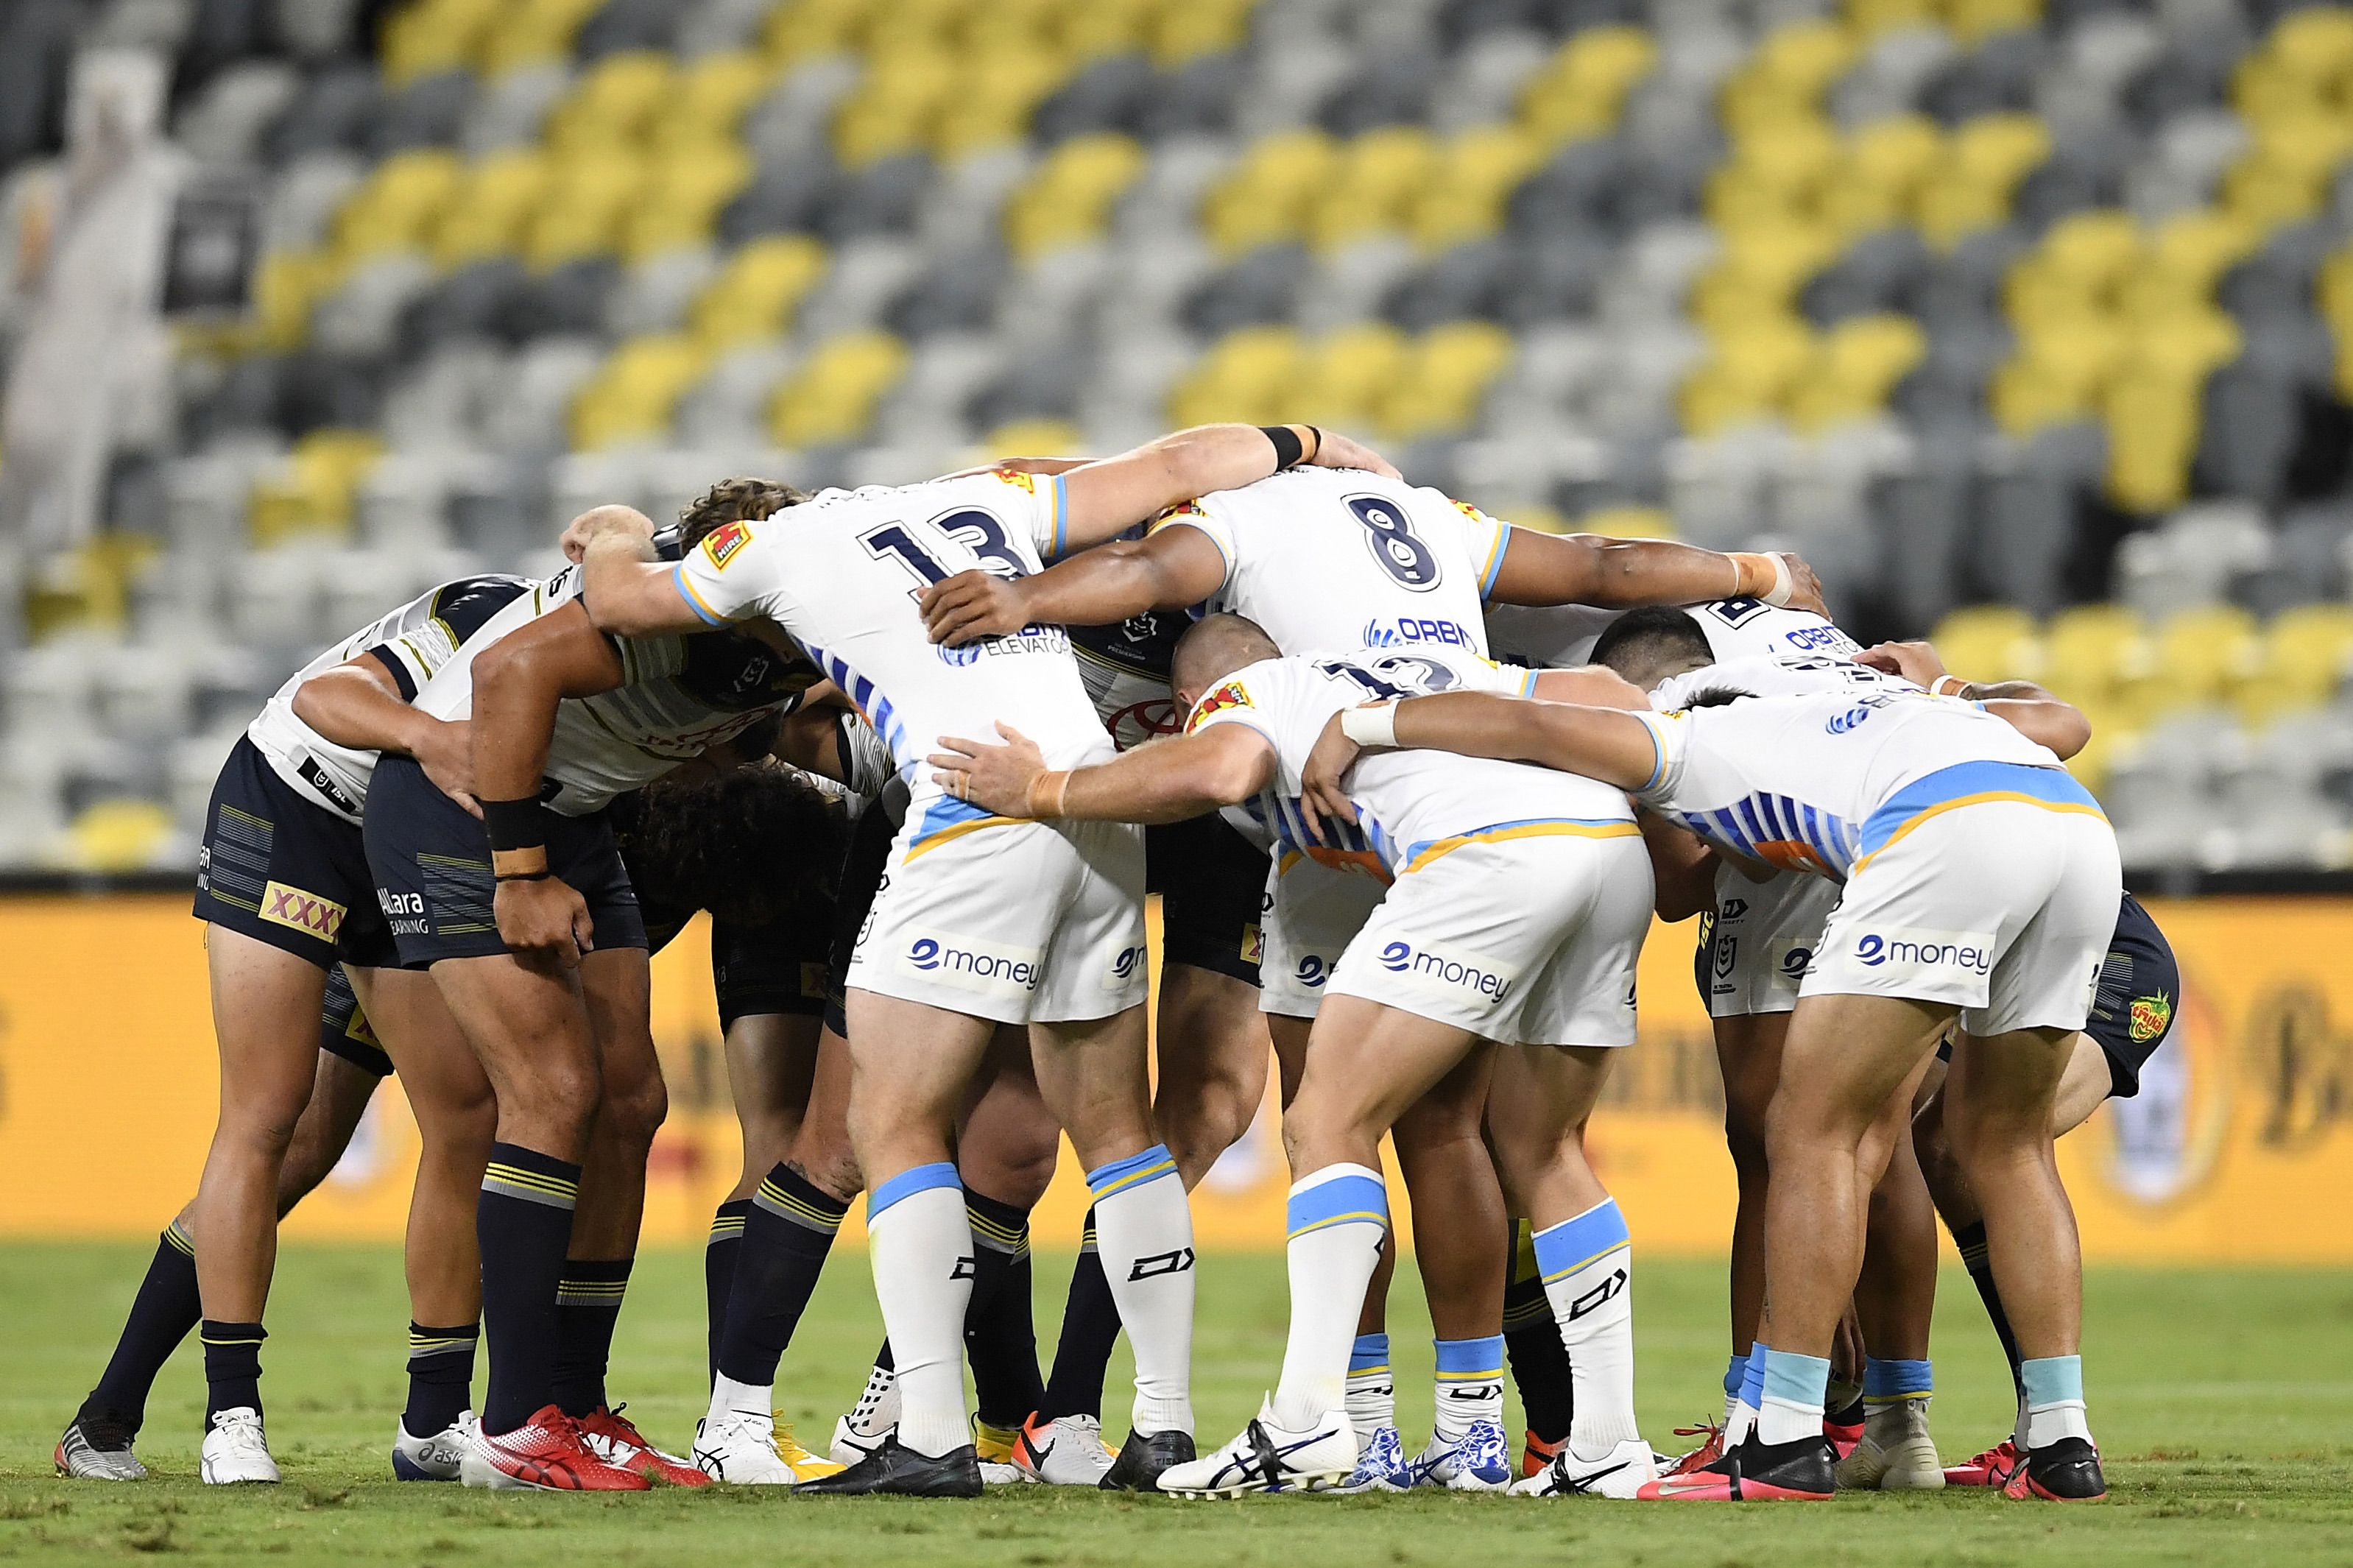 'Player welfare' grounds cited as scrums scrapped for France-England rugby league Test